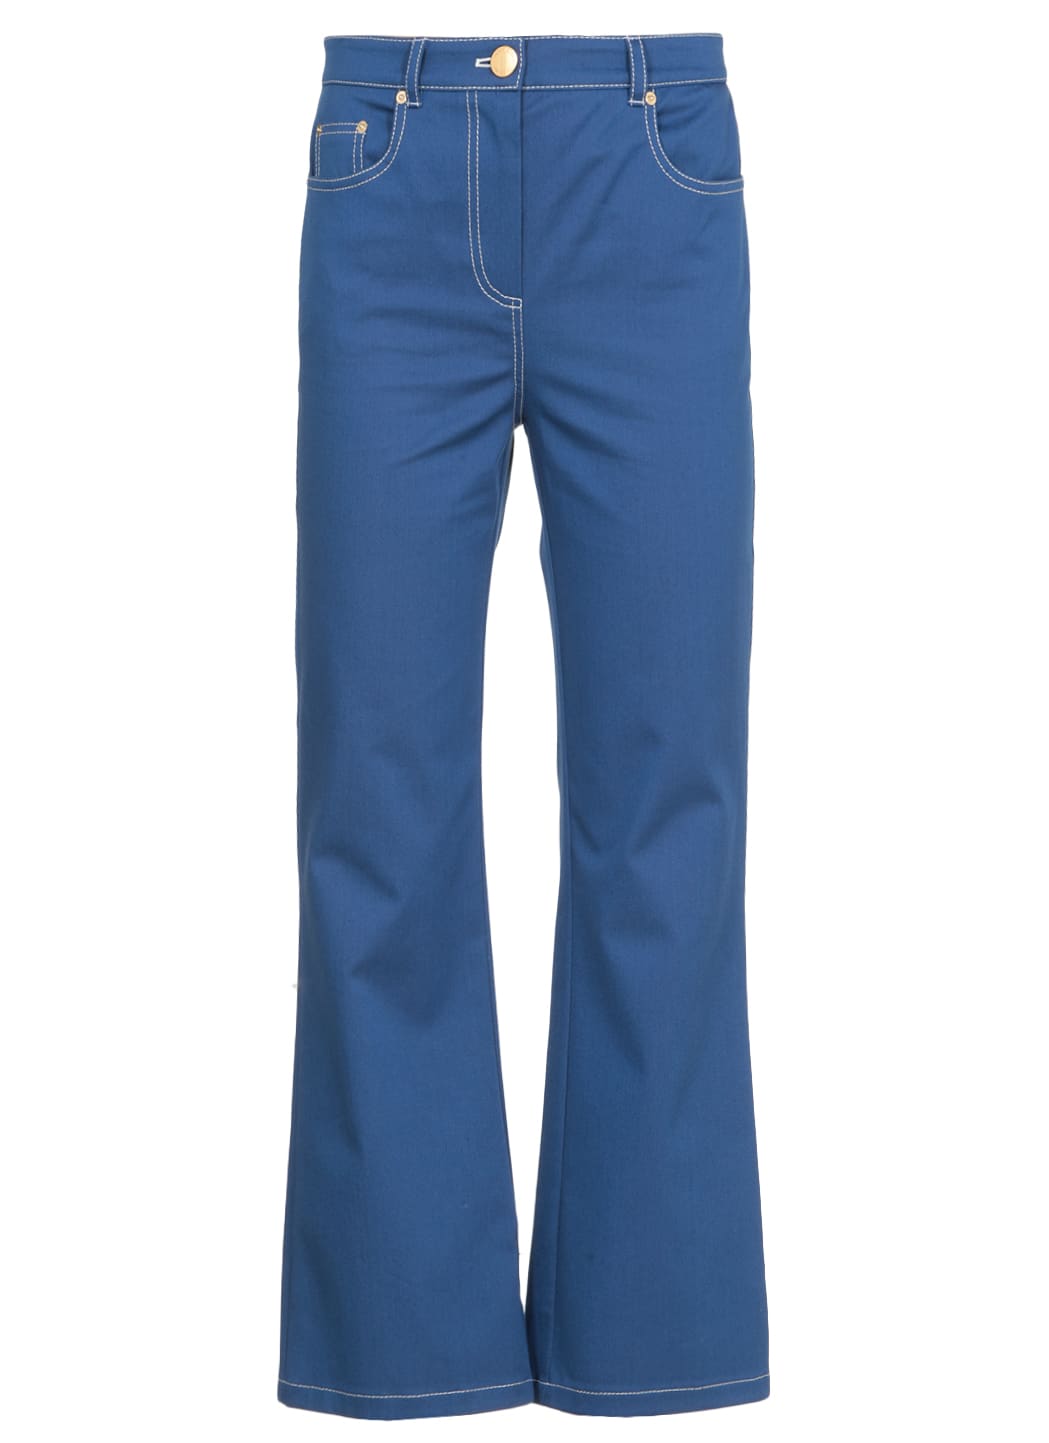 Boutique Moschino Stretch Fabric Pant In Blue